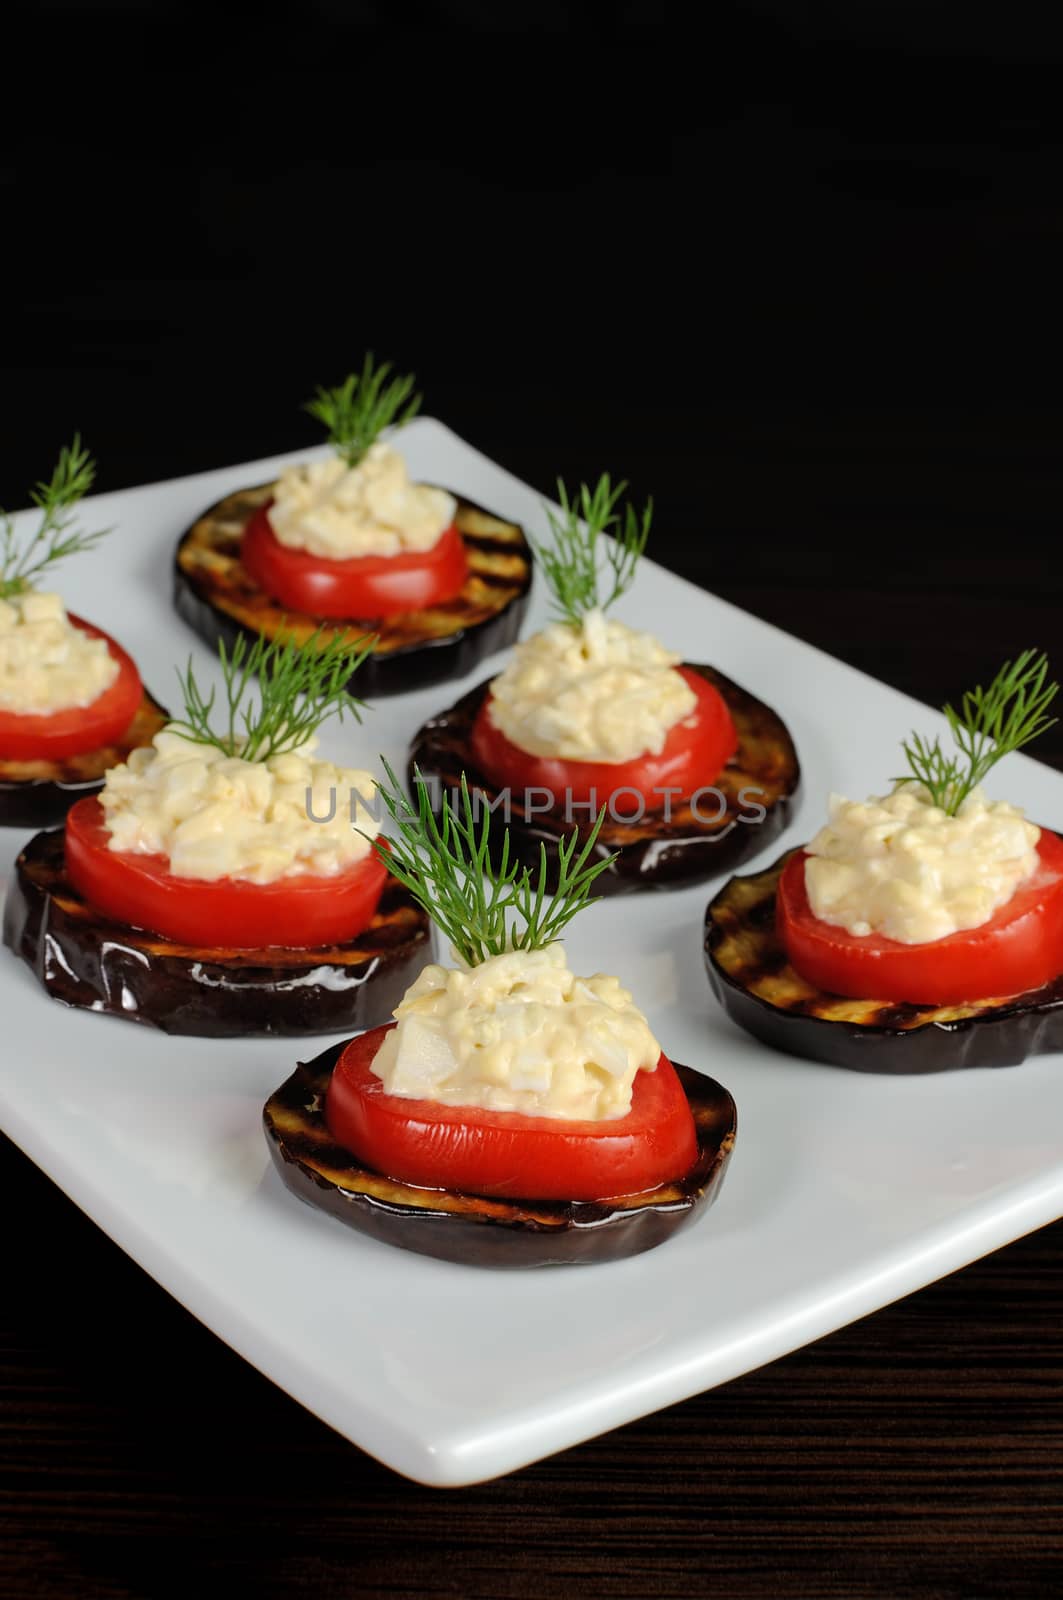 appetizer of grilled eggplant with tomato and spicy stuffing